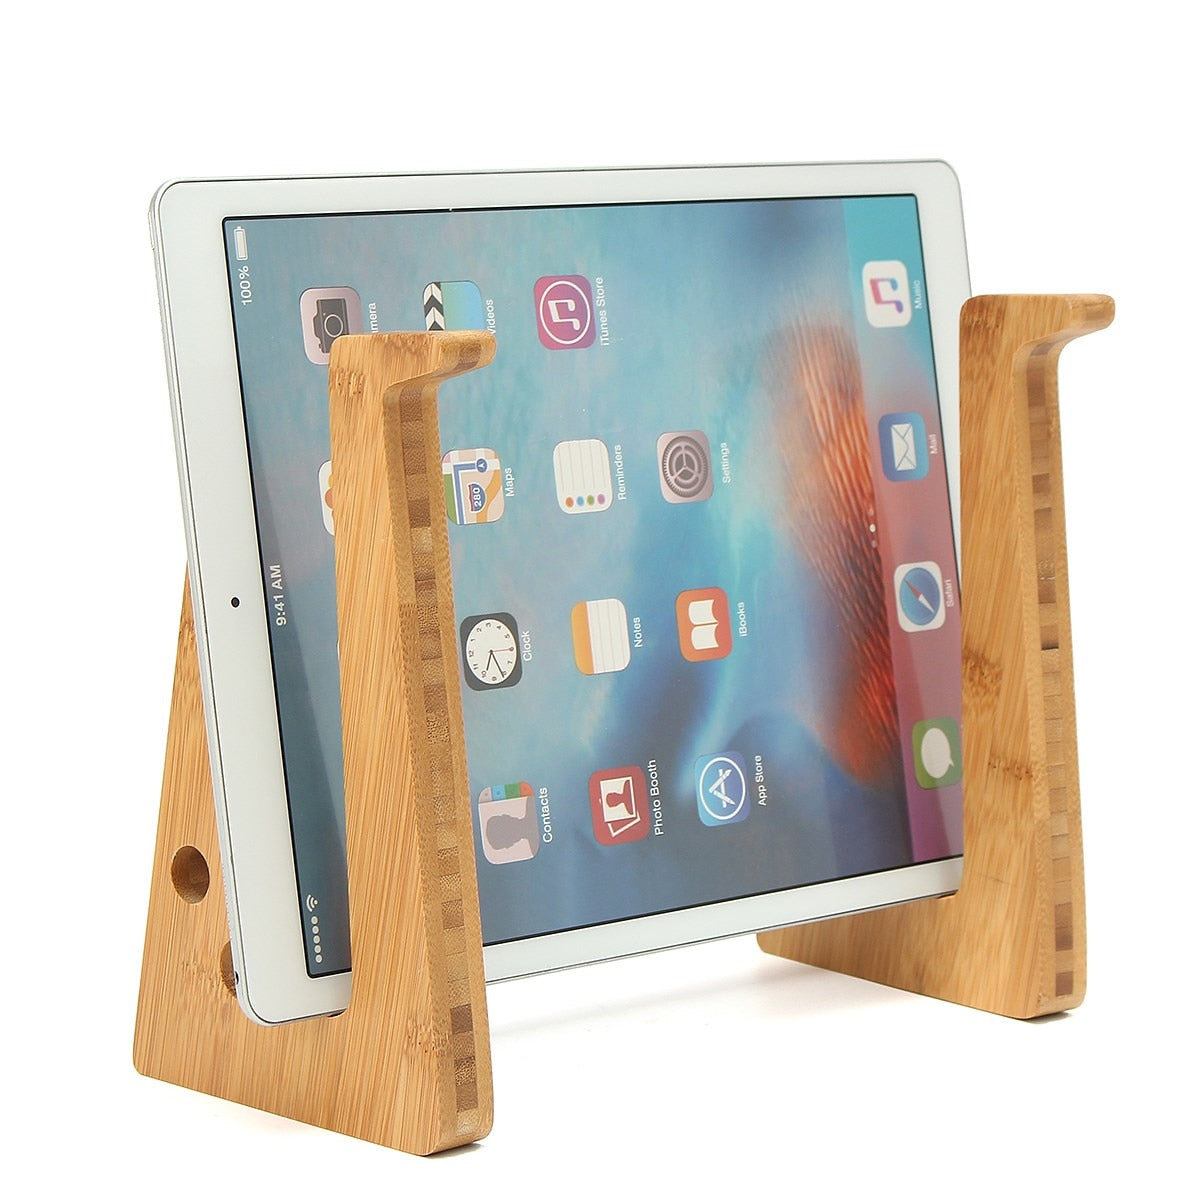 Portable Bamboo Wooden Laptop & Tablet Stand